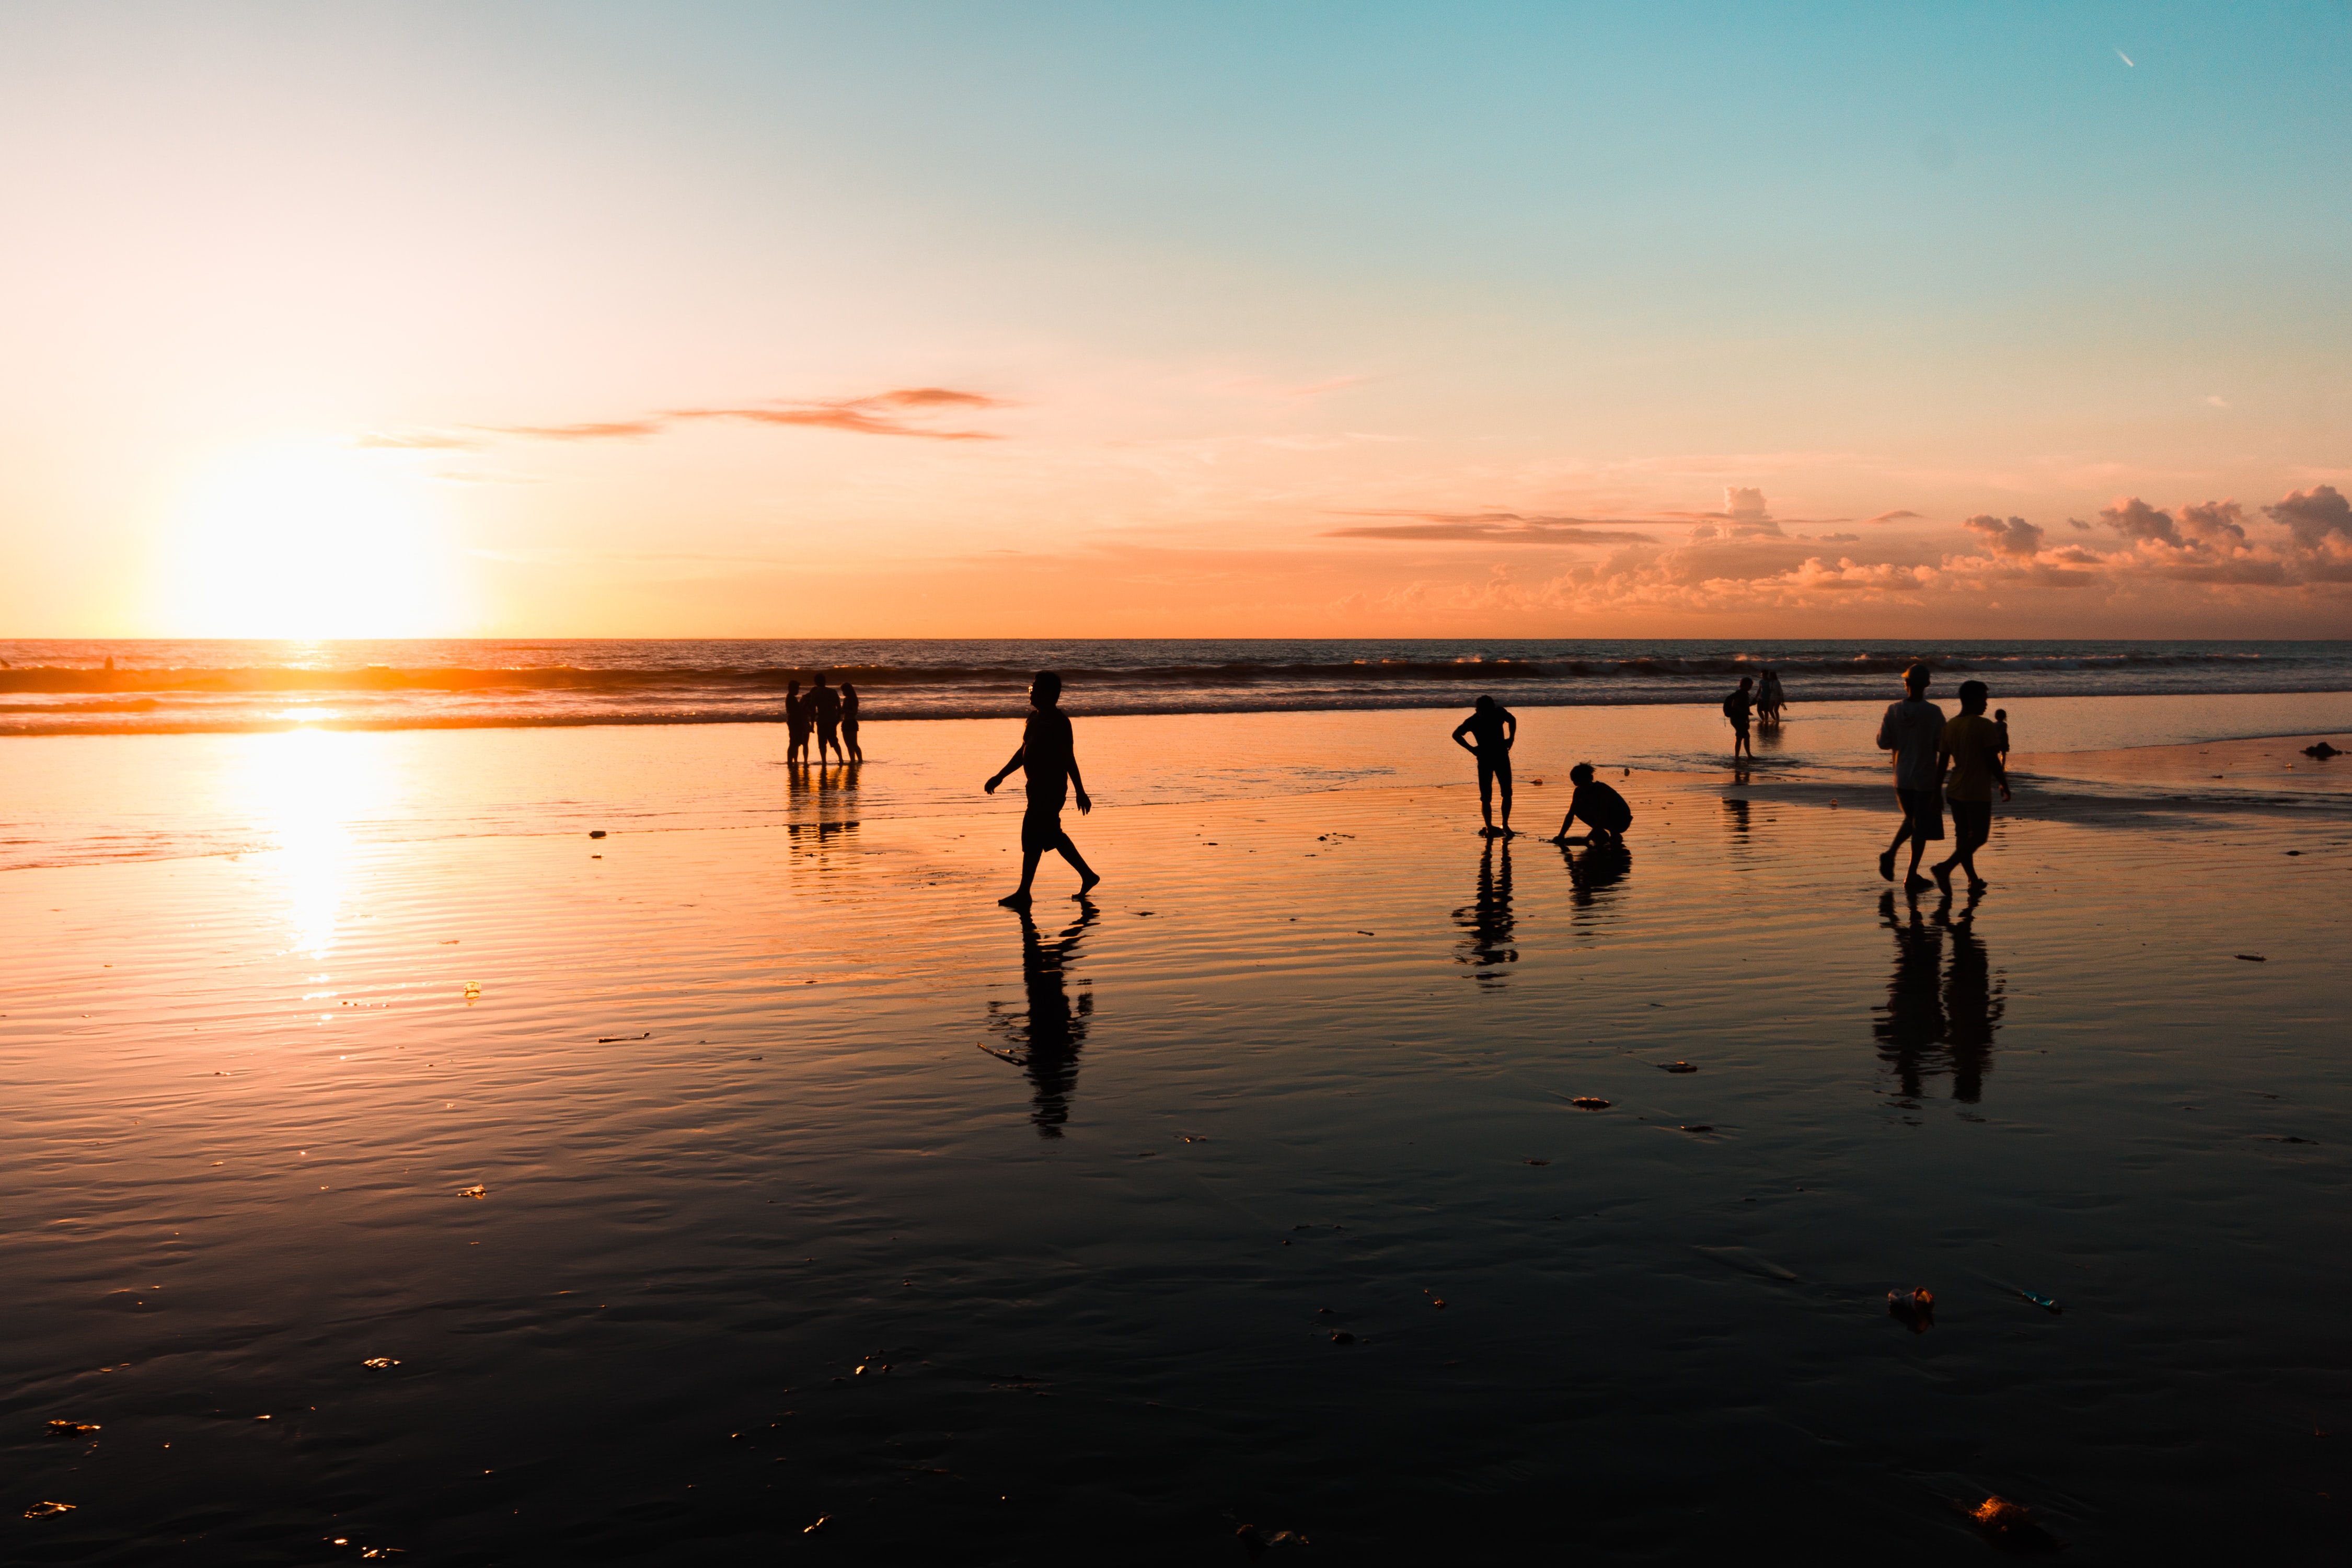 People at beach during golden hour photo. Photo by: George Bakos (unsplash.com)